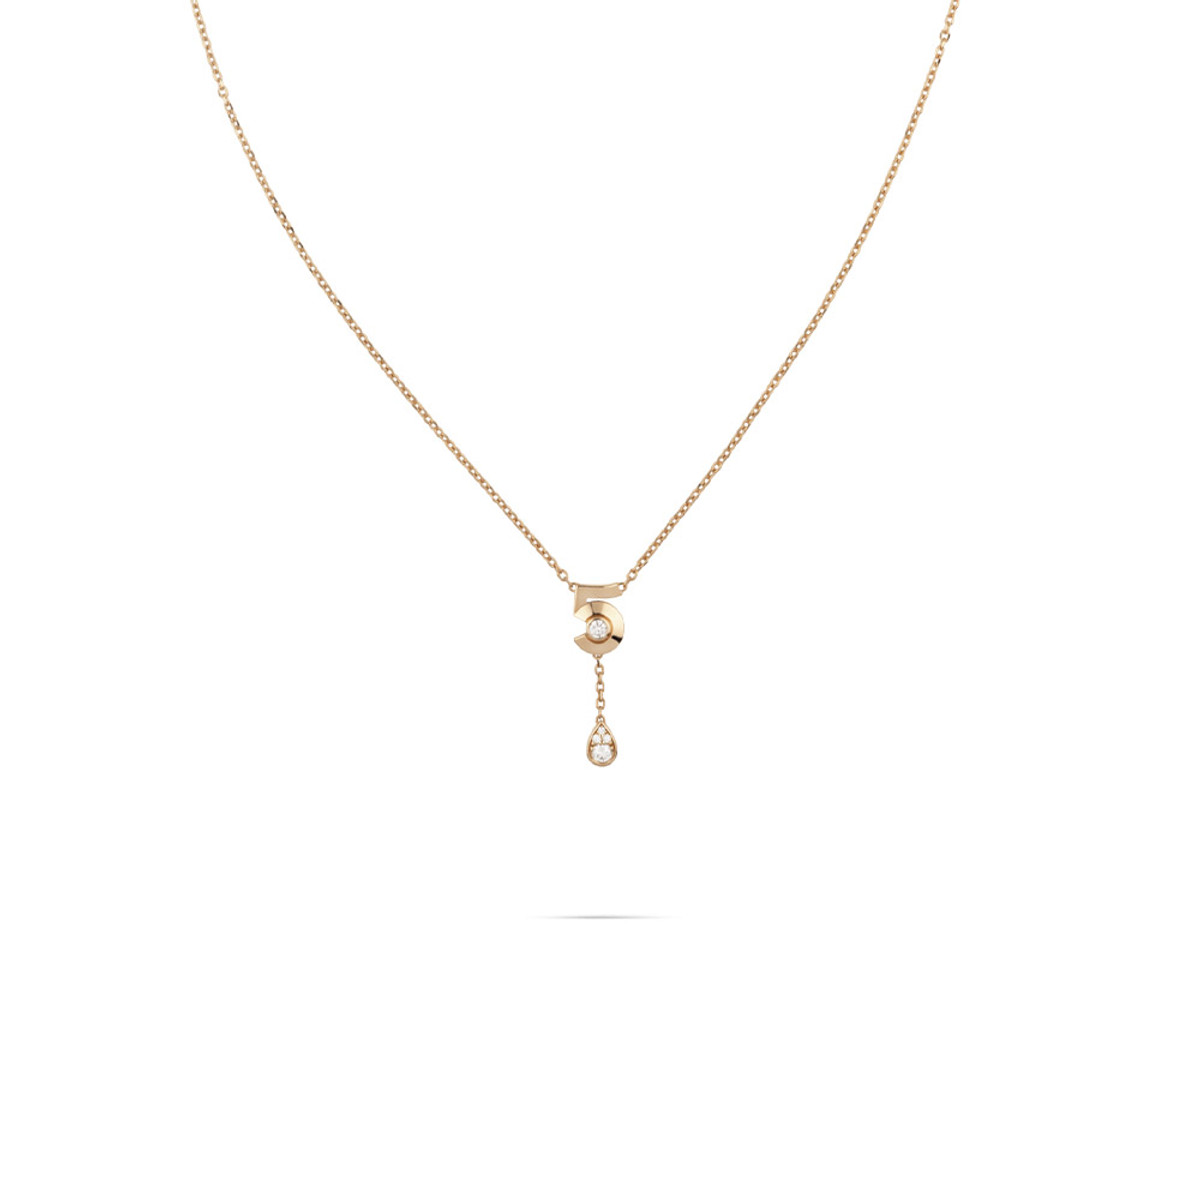 CHANEL Extrait N°5 Necklace-52979 Product Image